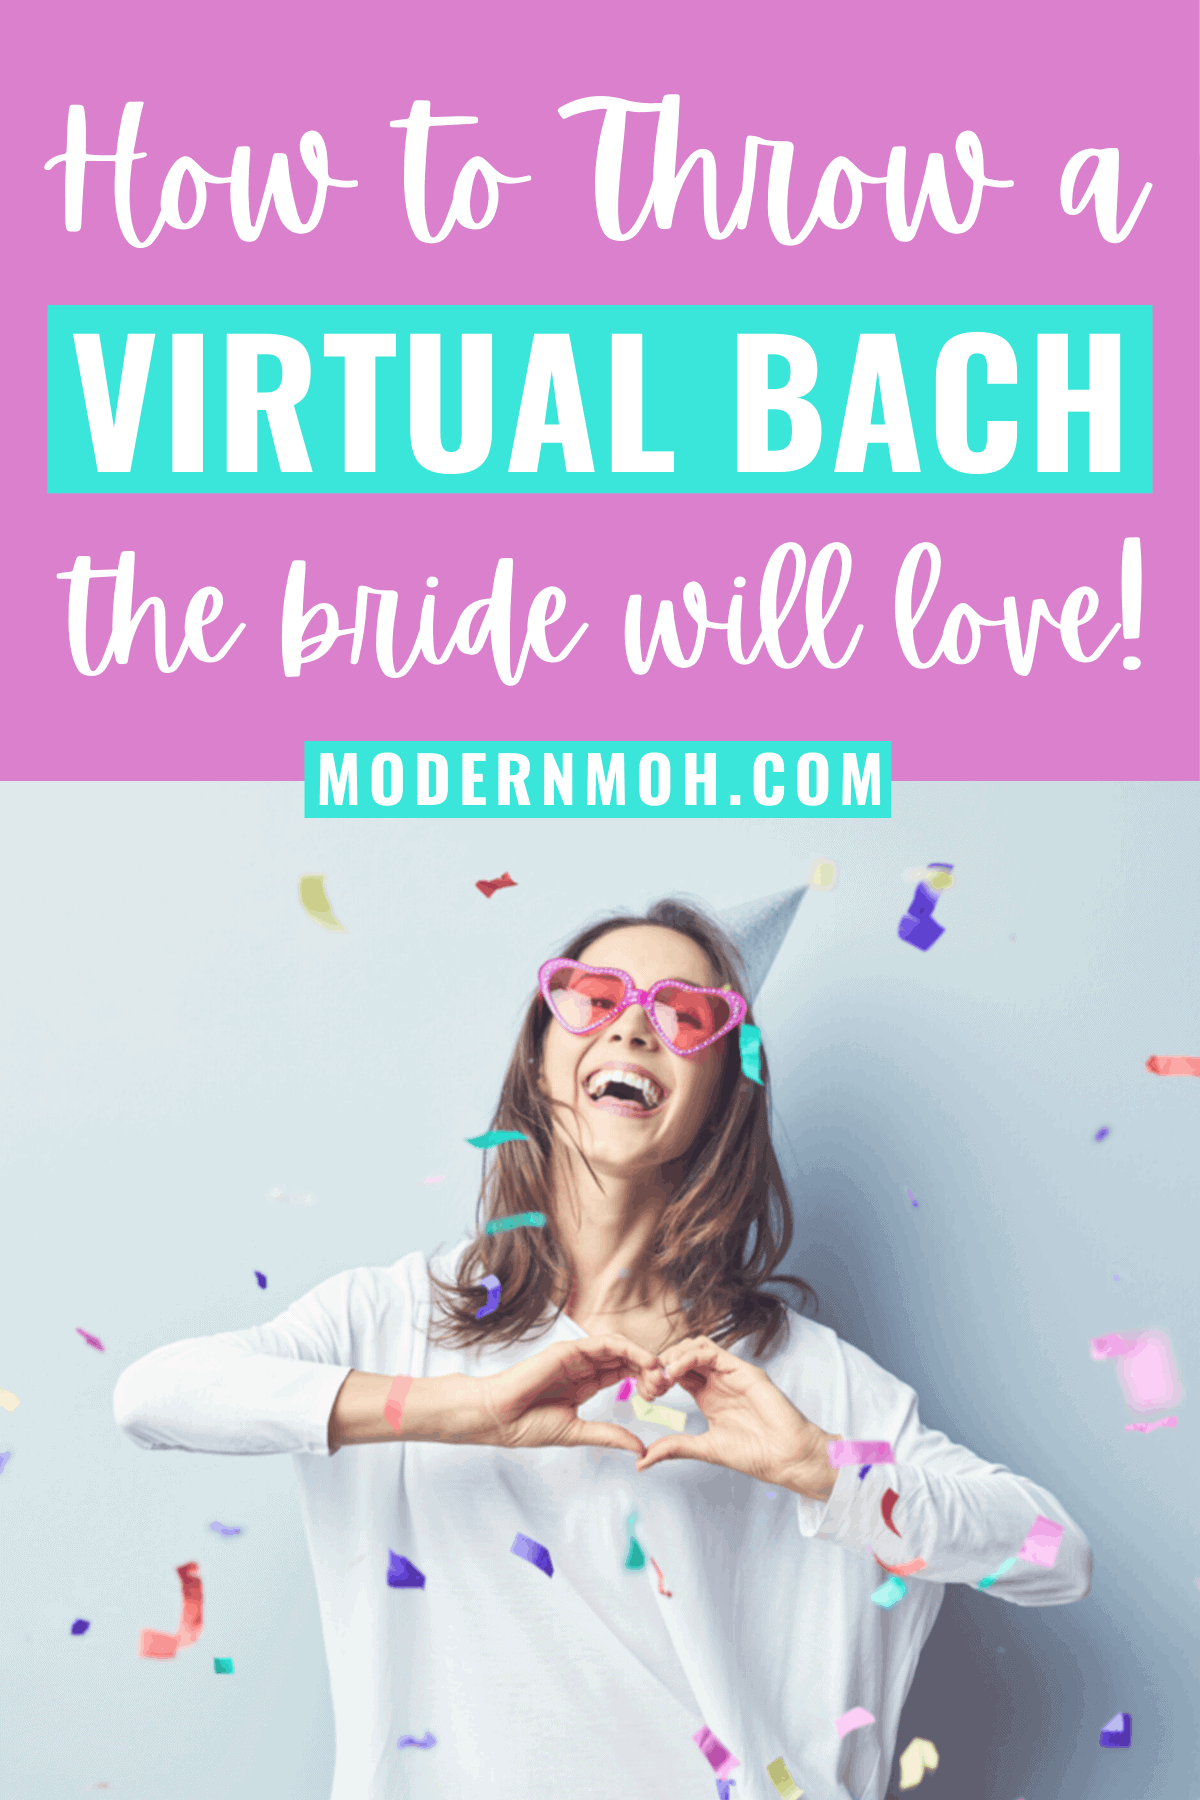 How to Throw a Virtual Bachelorette Party